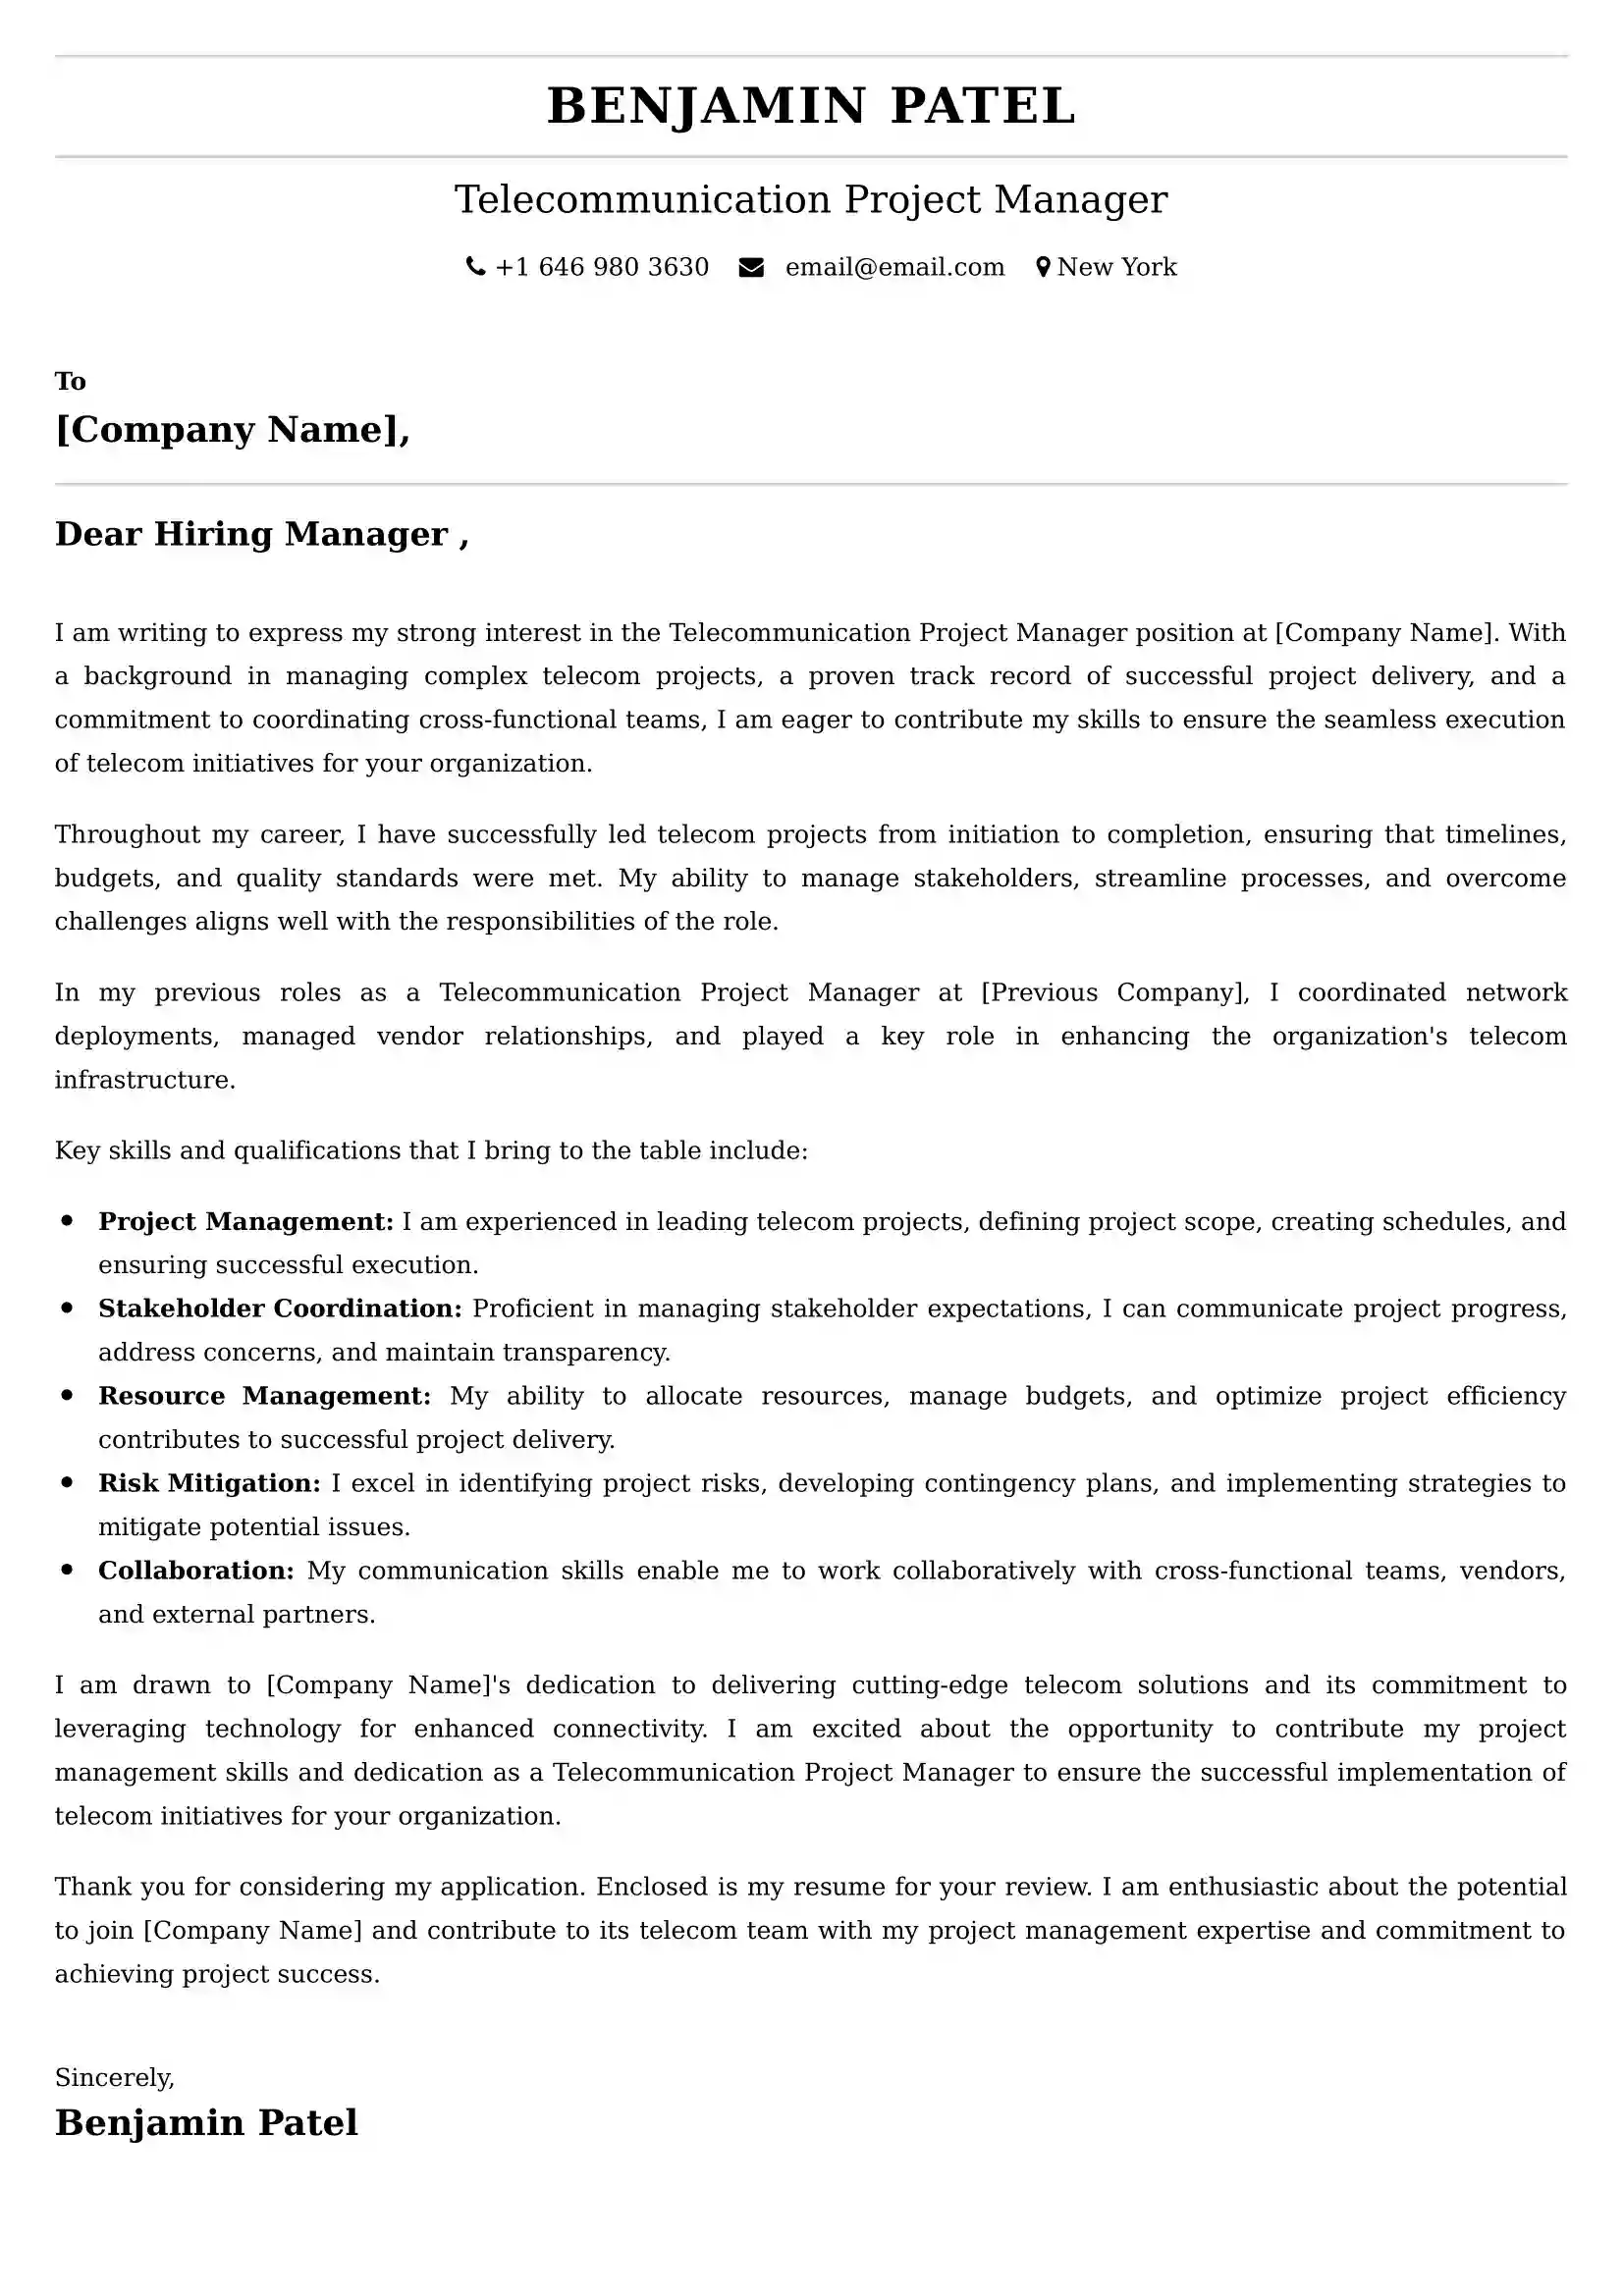 Telecommunication Project Manager Cover Letter Examples for UK 